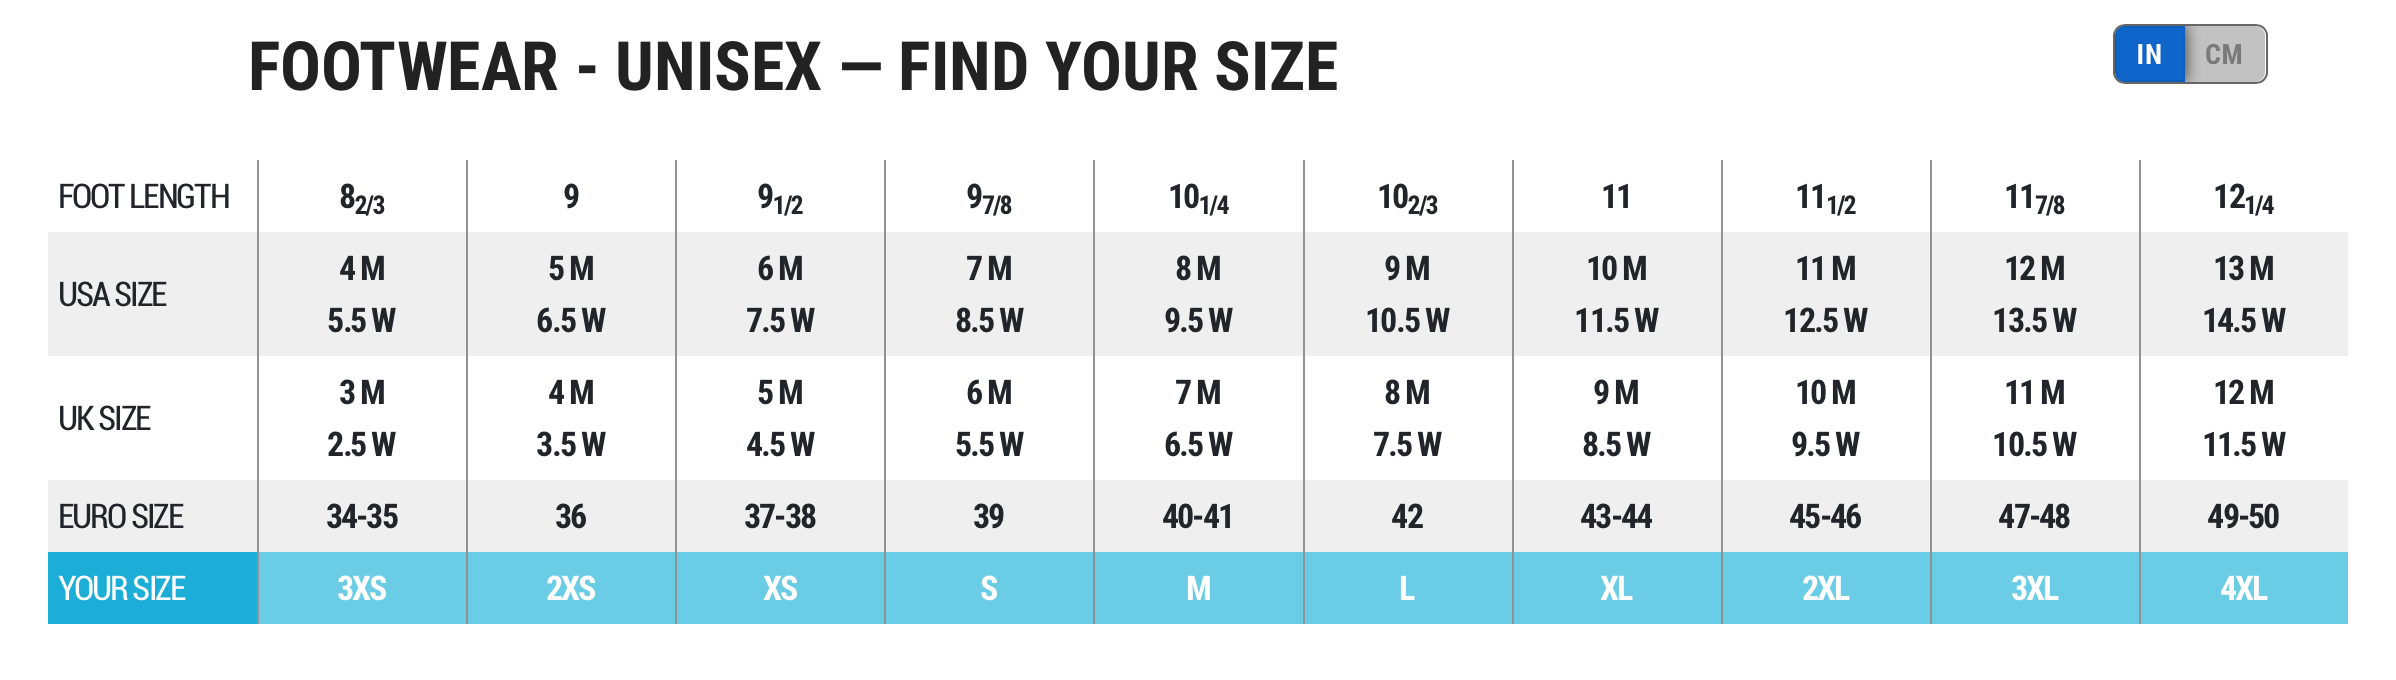 Male Size Chart for Soft Neoprene Replacement Socks